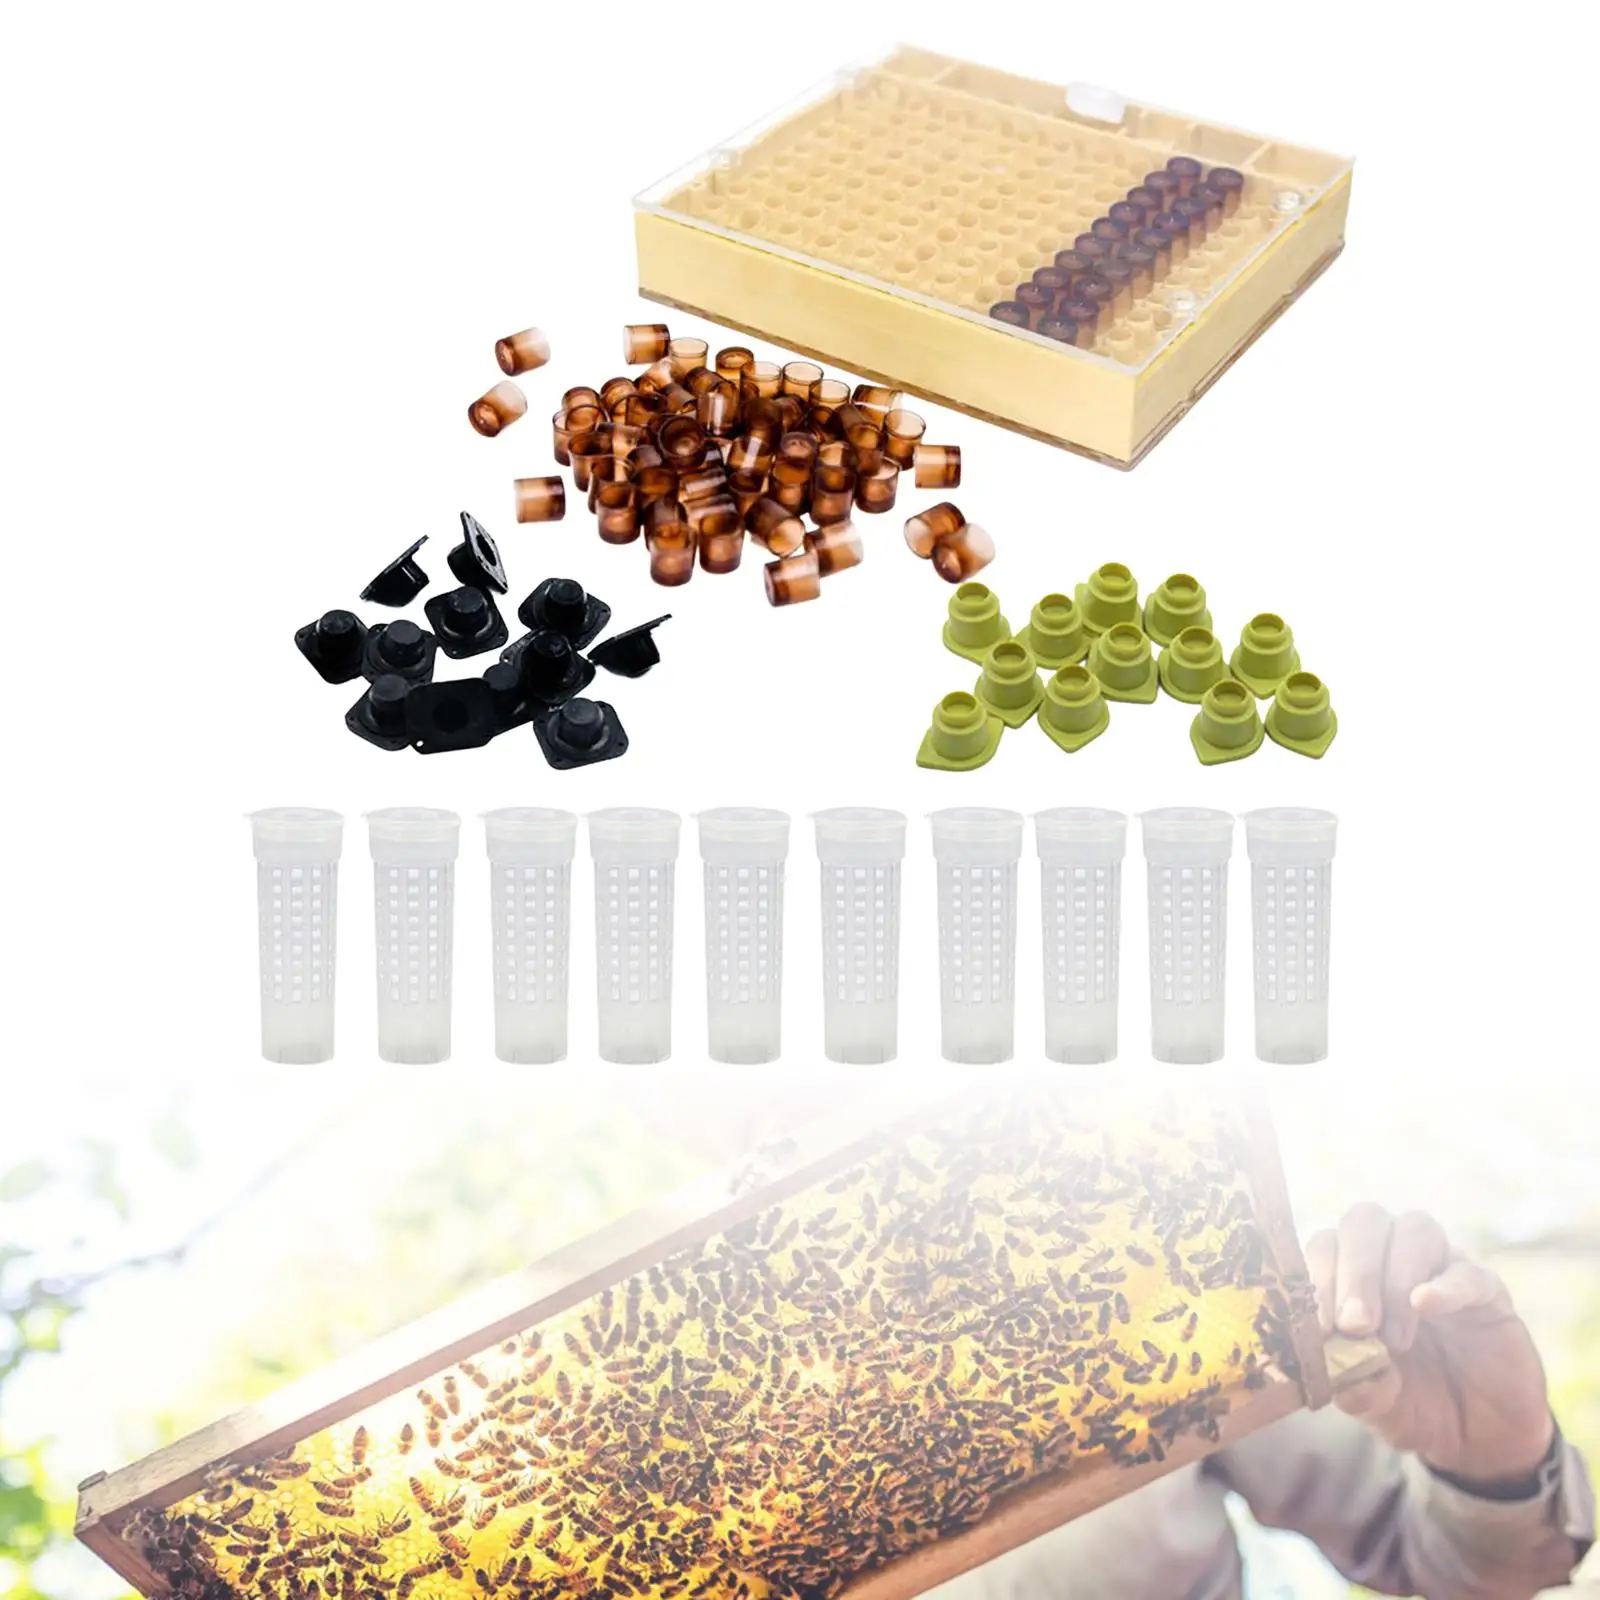 Beekeeping Complete Queen Rearing cup Kit Cultivating Box Accessories Equipment